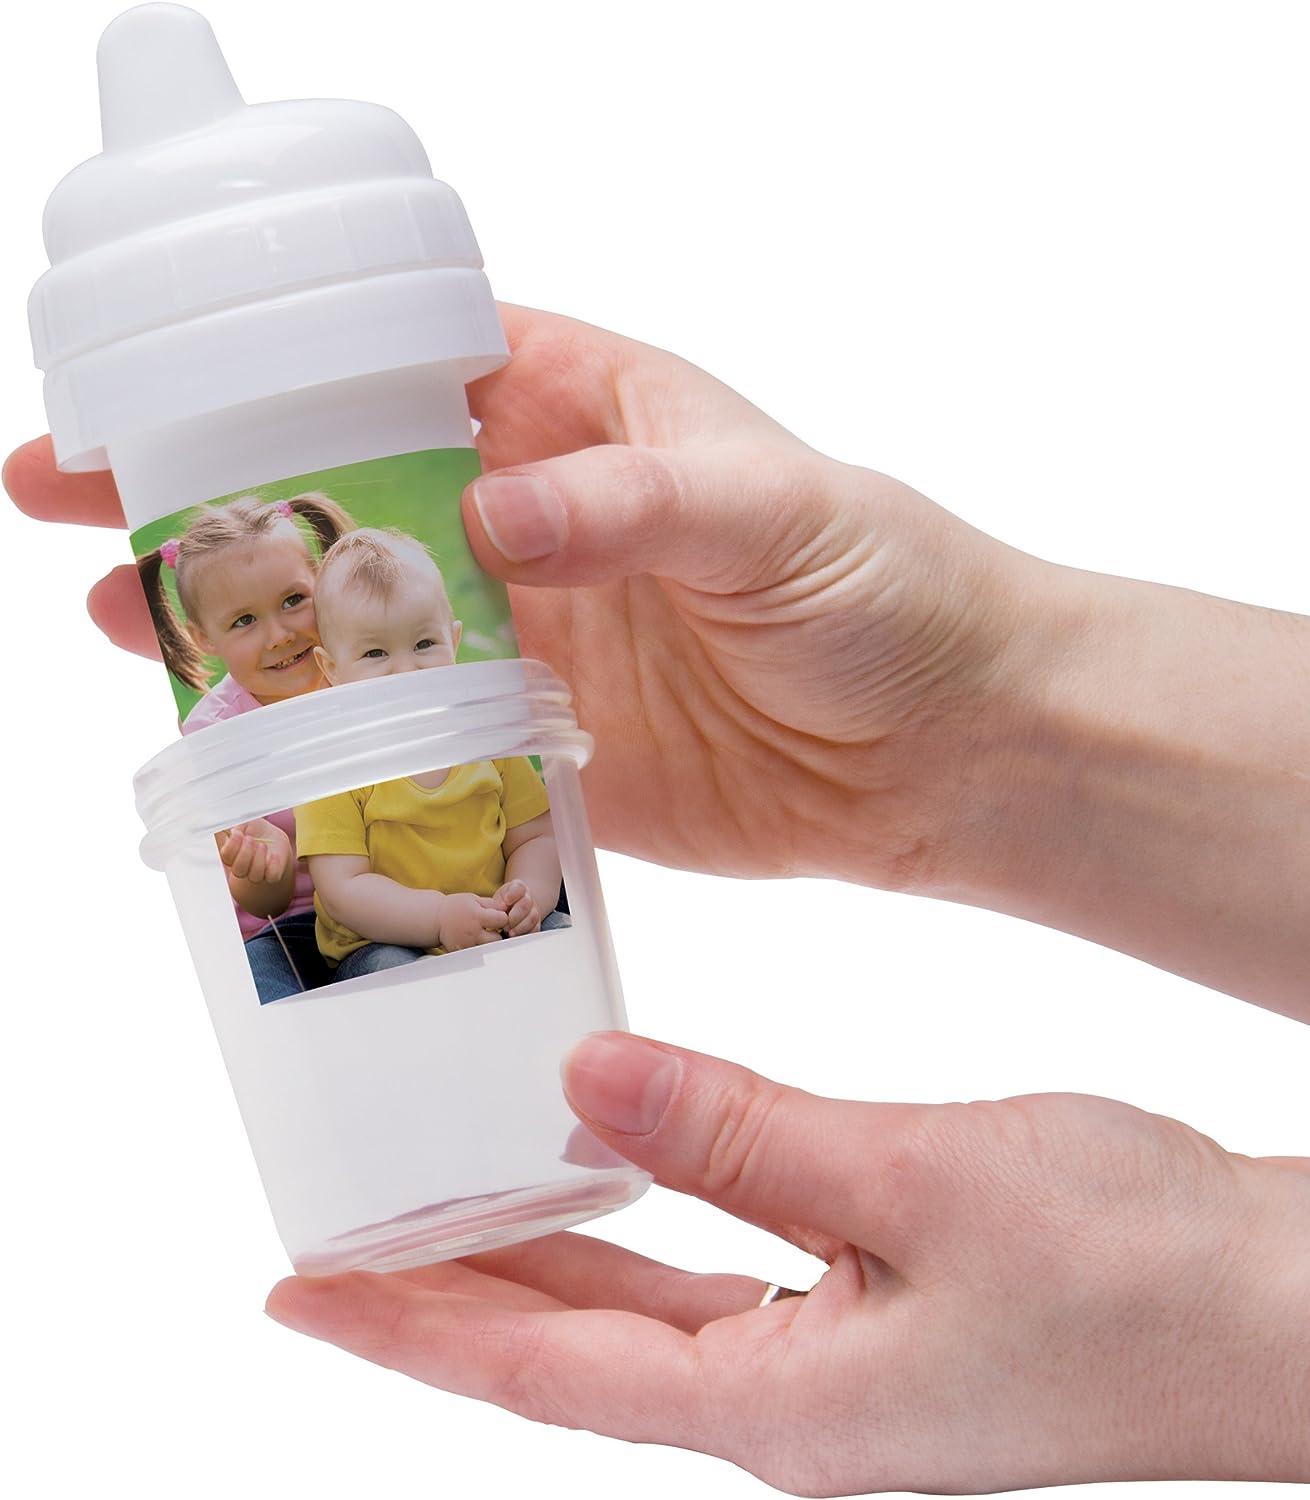 Sippy cups are temporary!